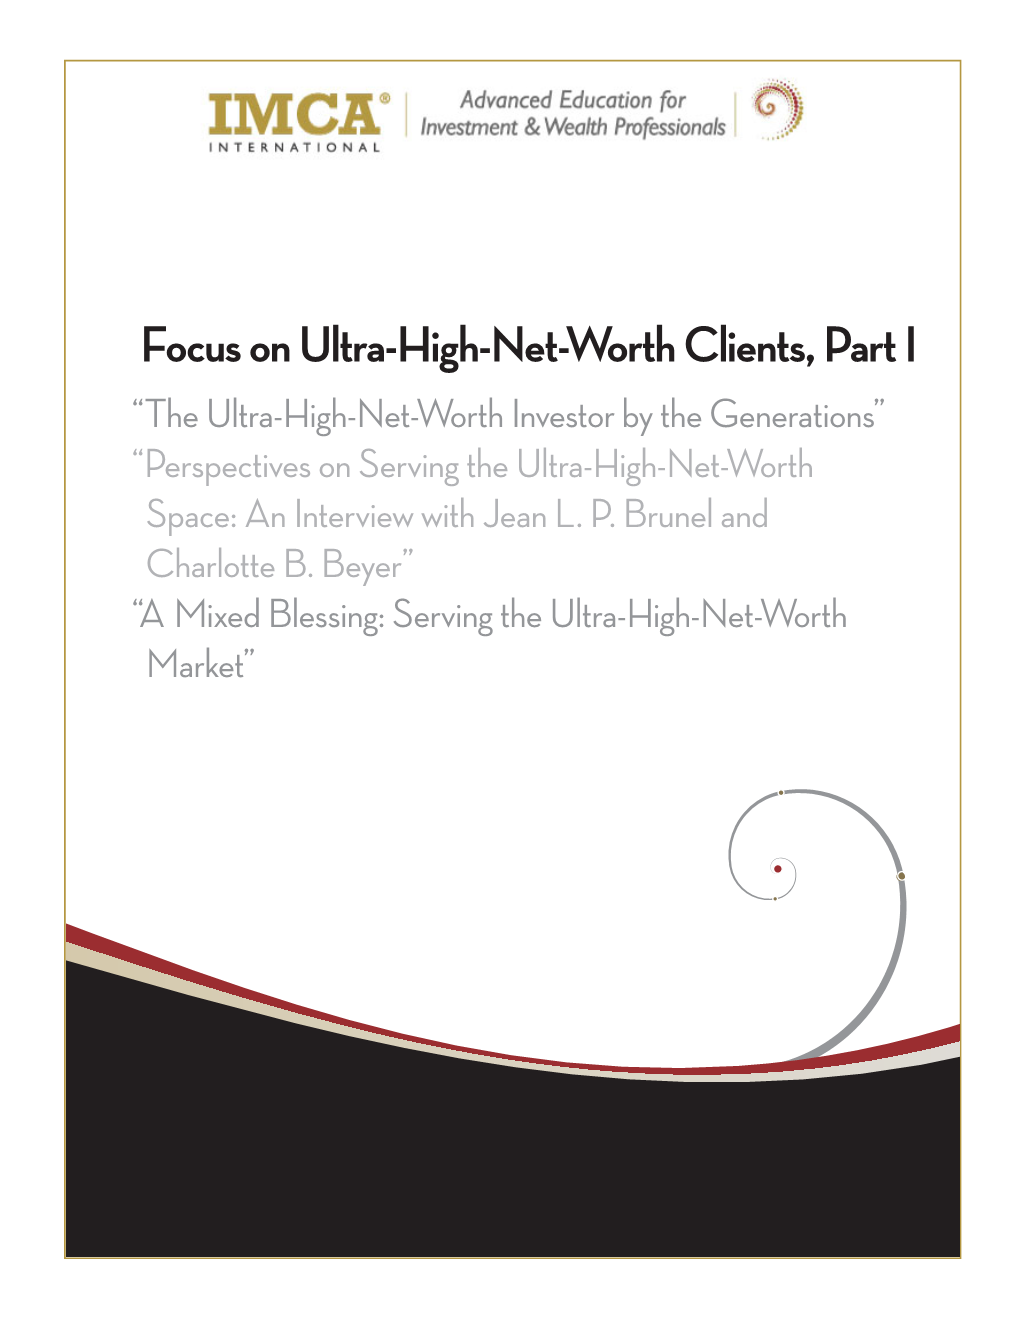 Focus on Ultra-High-Net-Worth Clients, Part I